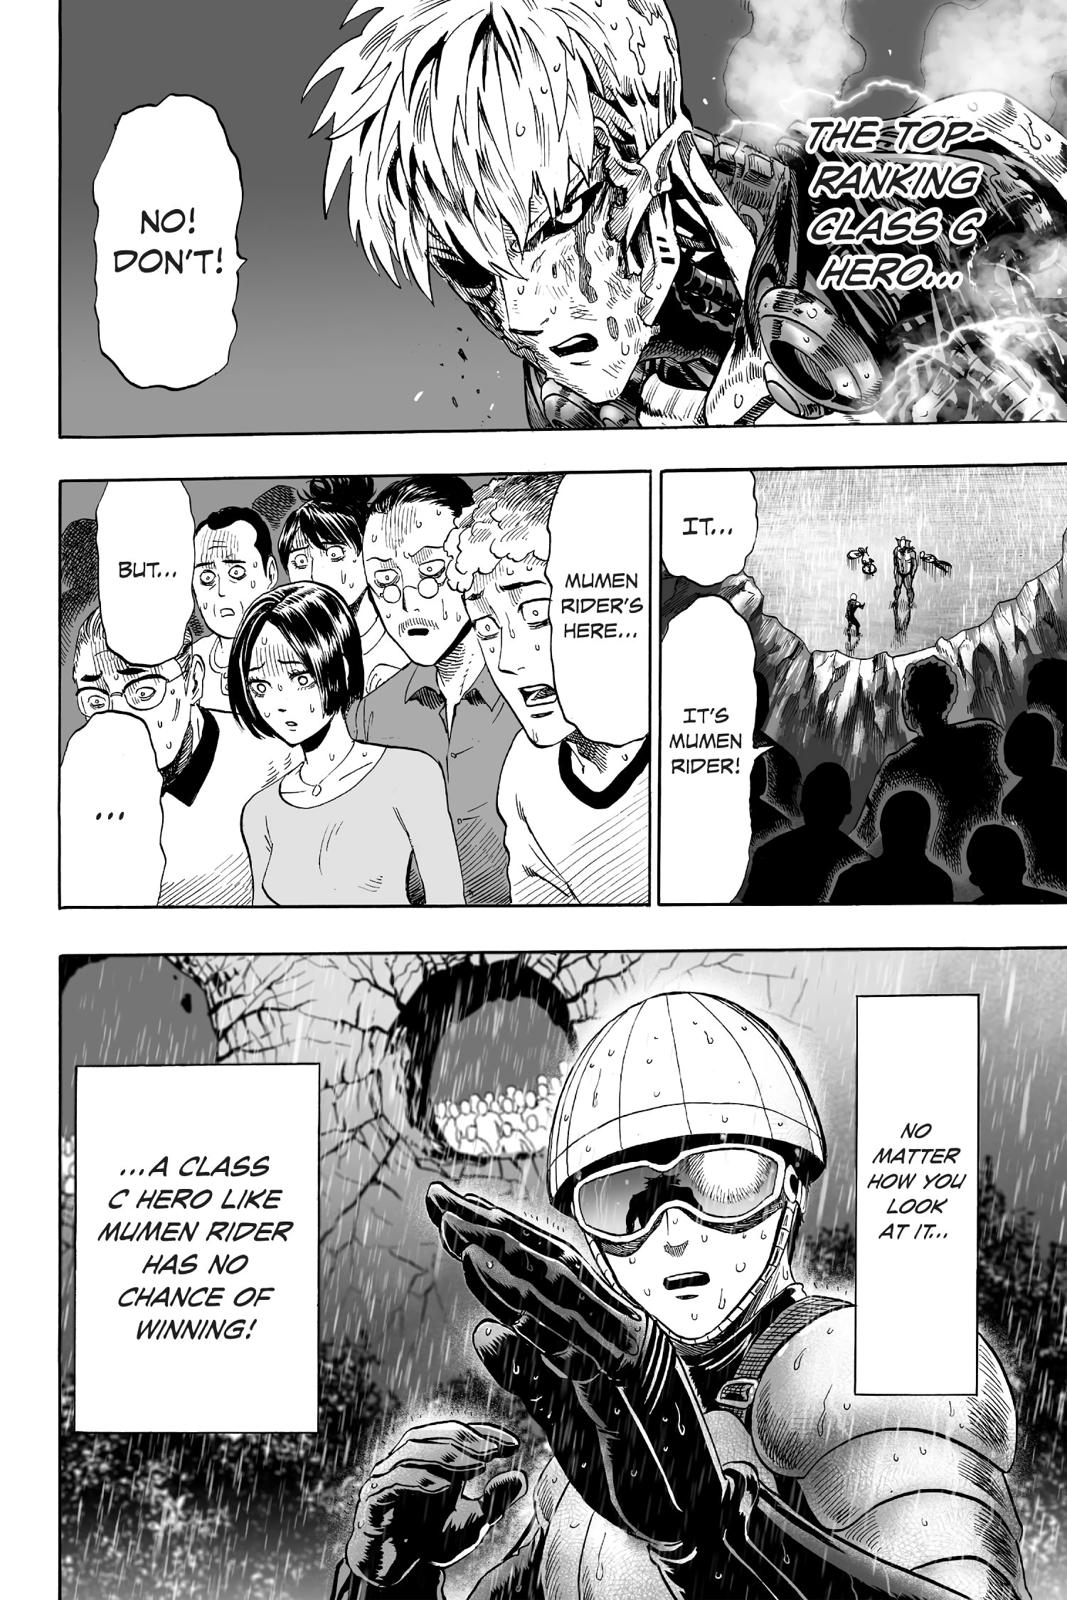 One-Punch Man, Punch 27 image 11